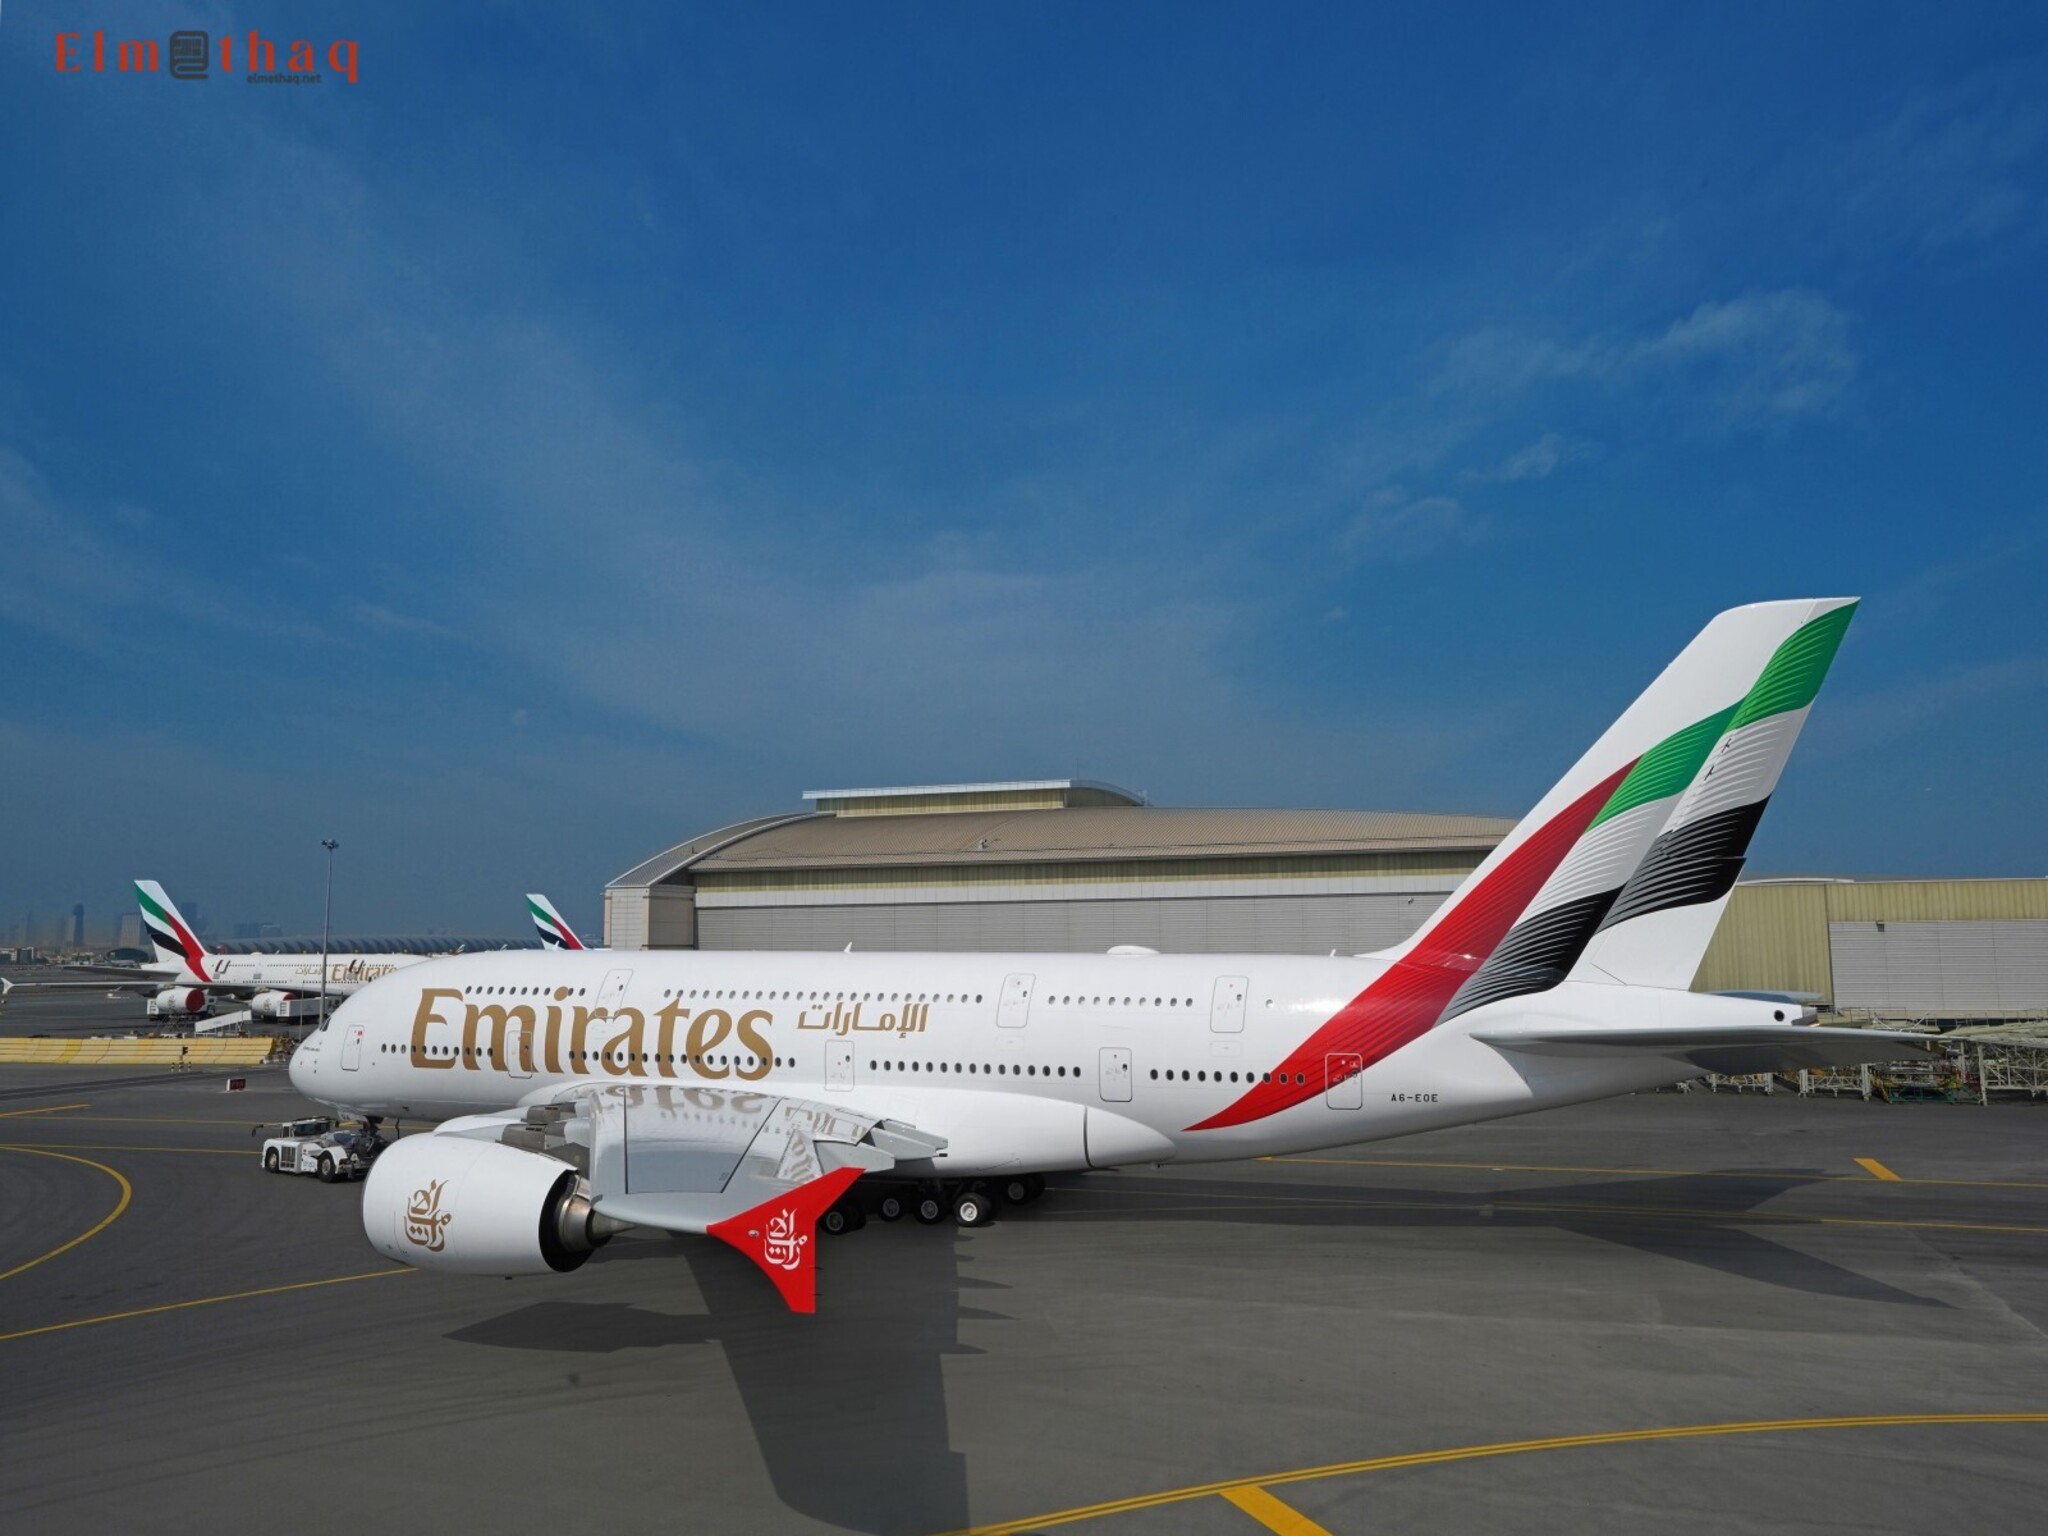 Emirates unveils a codeshare agreement with Avianca for expanded connectivity